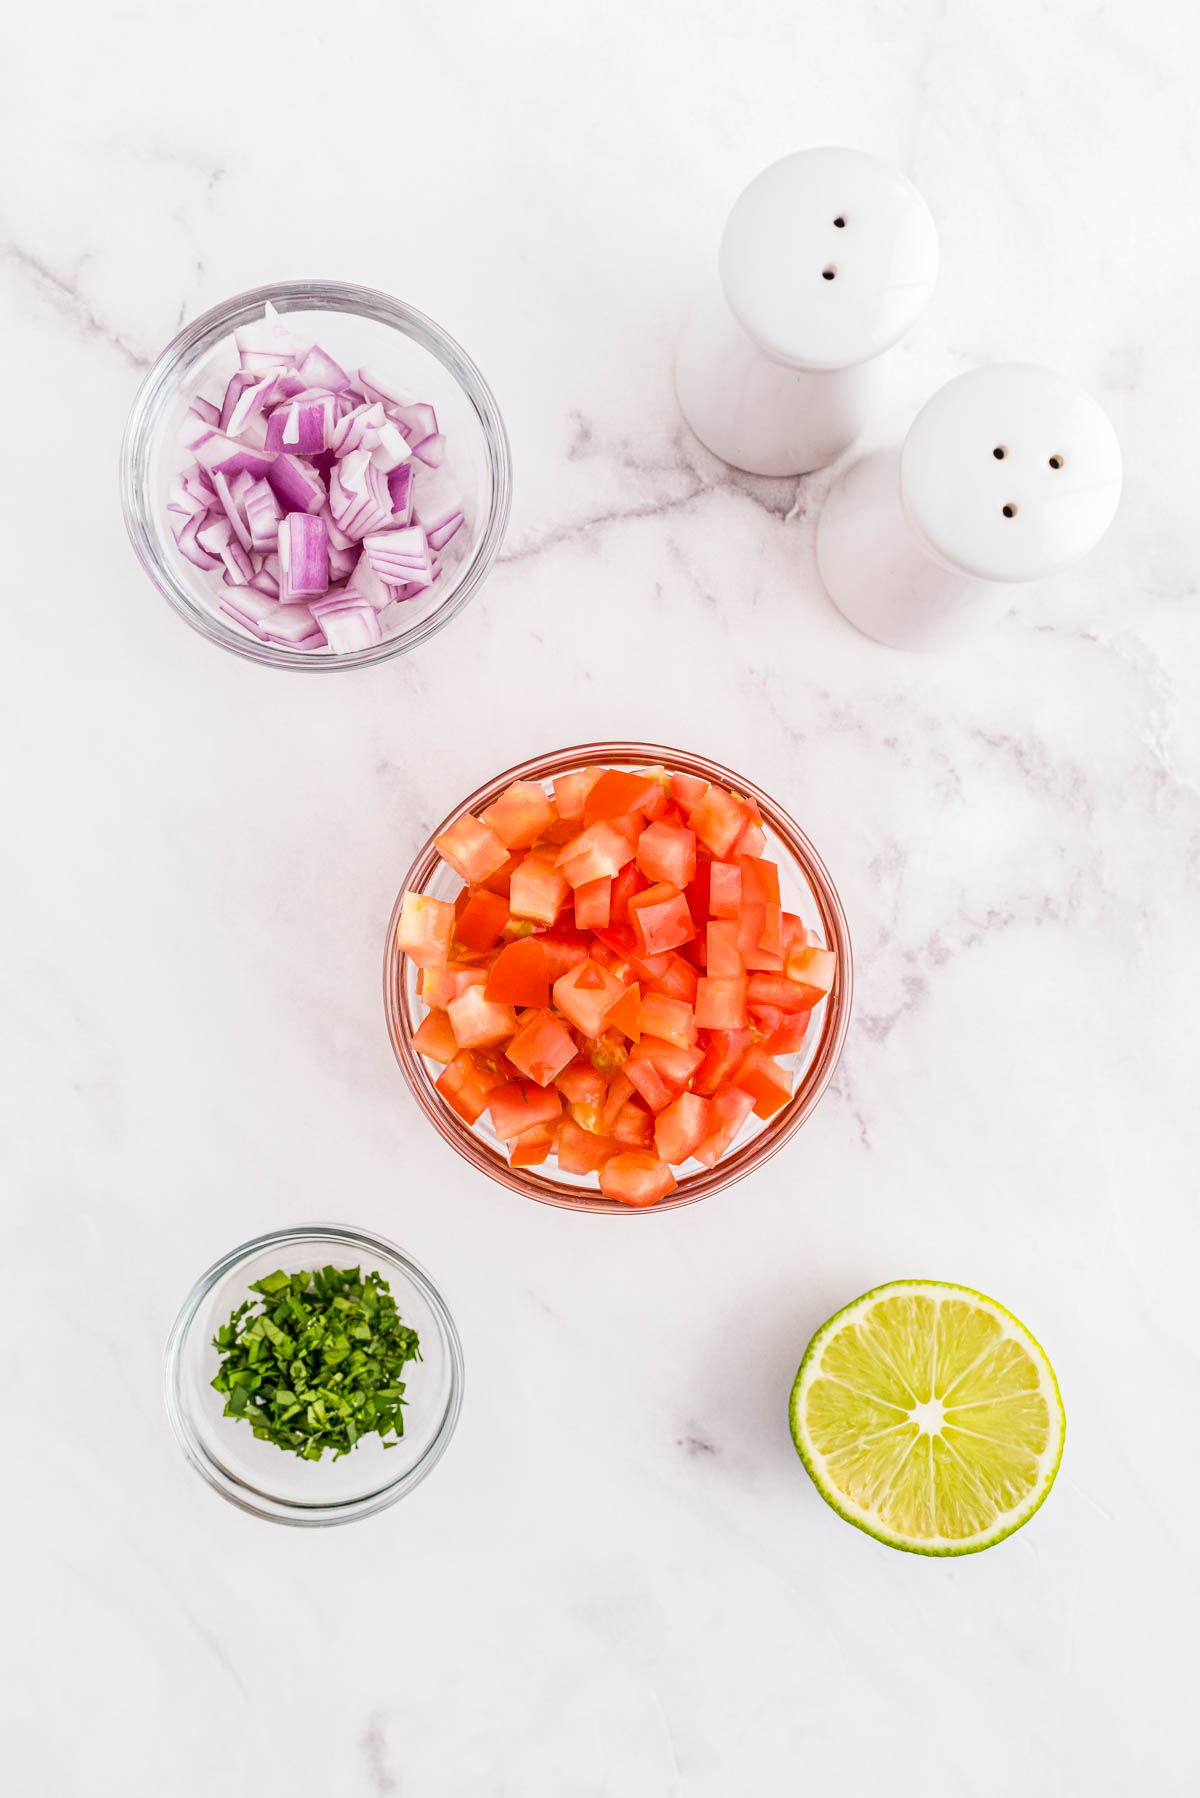 All of the ingredients needed to make this Pico De Gallo recipe.